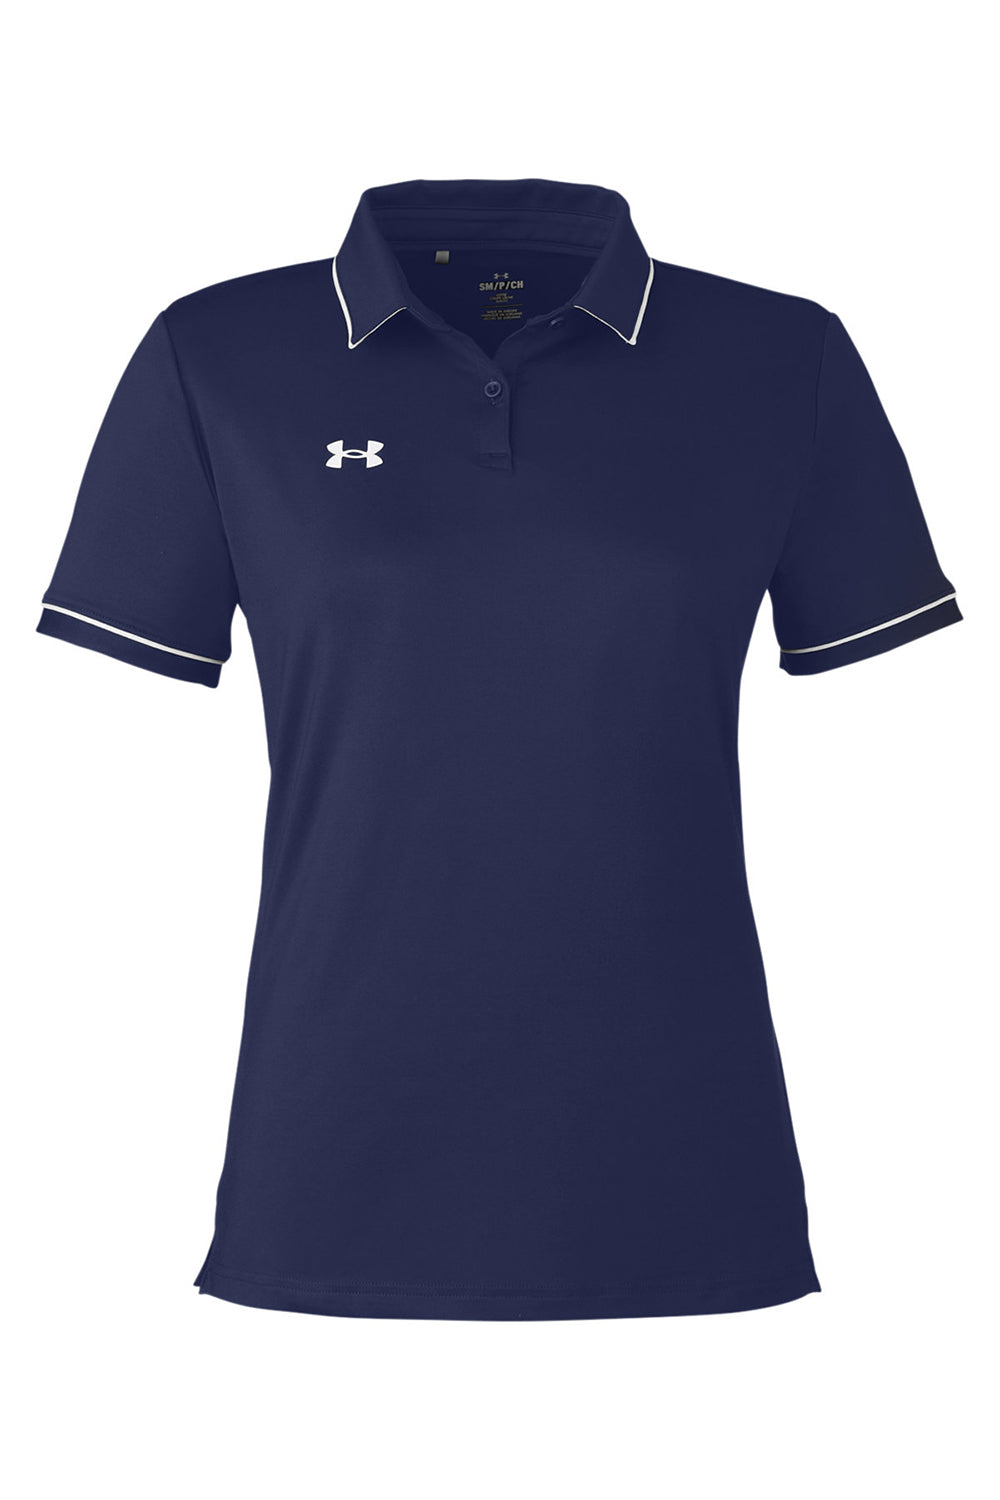 Under Armour 1376905 Womens Teams Performance Moisture Wicking Short Sleeve Polo Shirt Midnight Navy Blue Flat Front